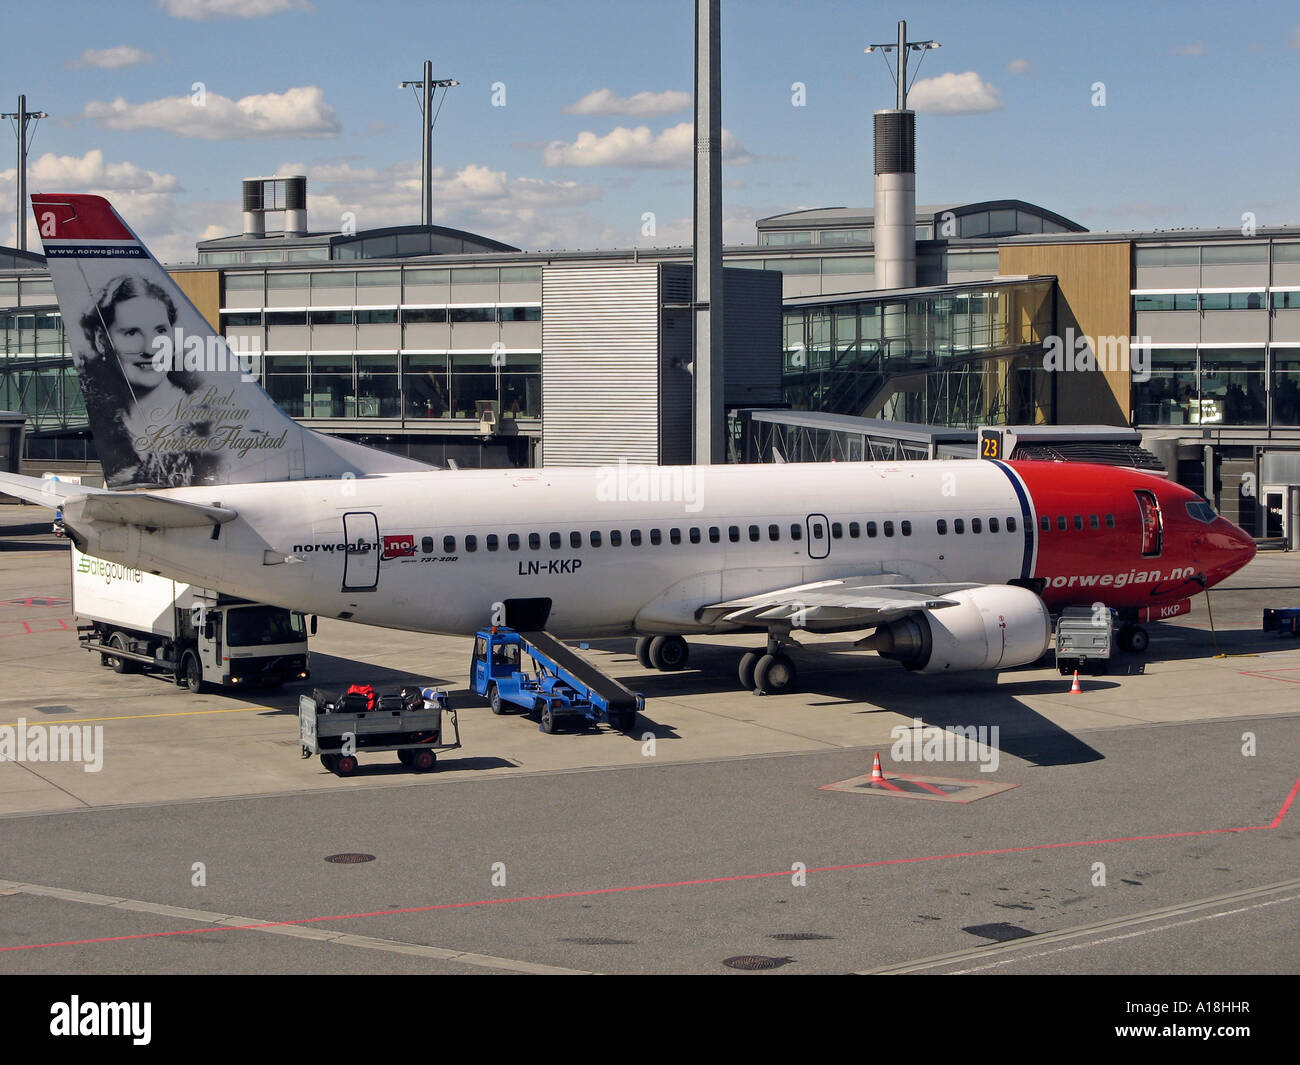 Servicing an air plane at Oslo Airport Gardermoen, OSL, located in Ullensaker, Norway Stock Photo